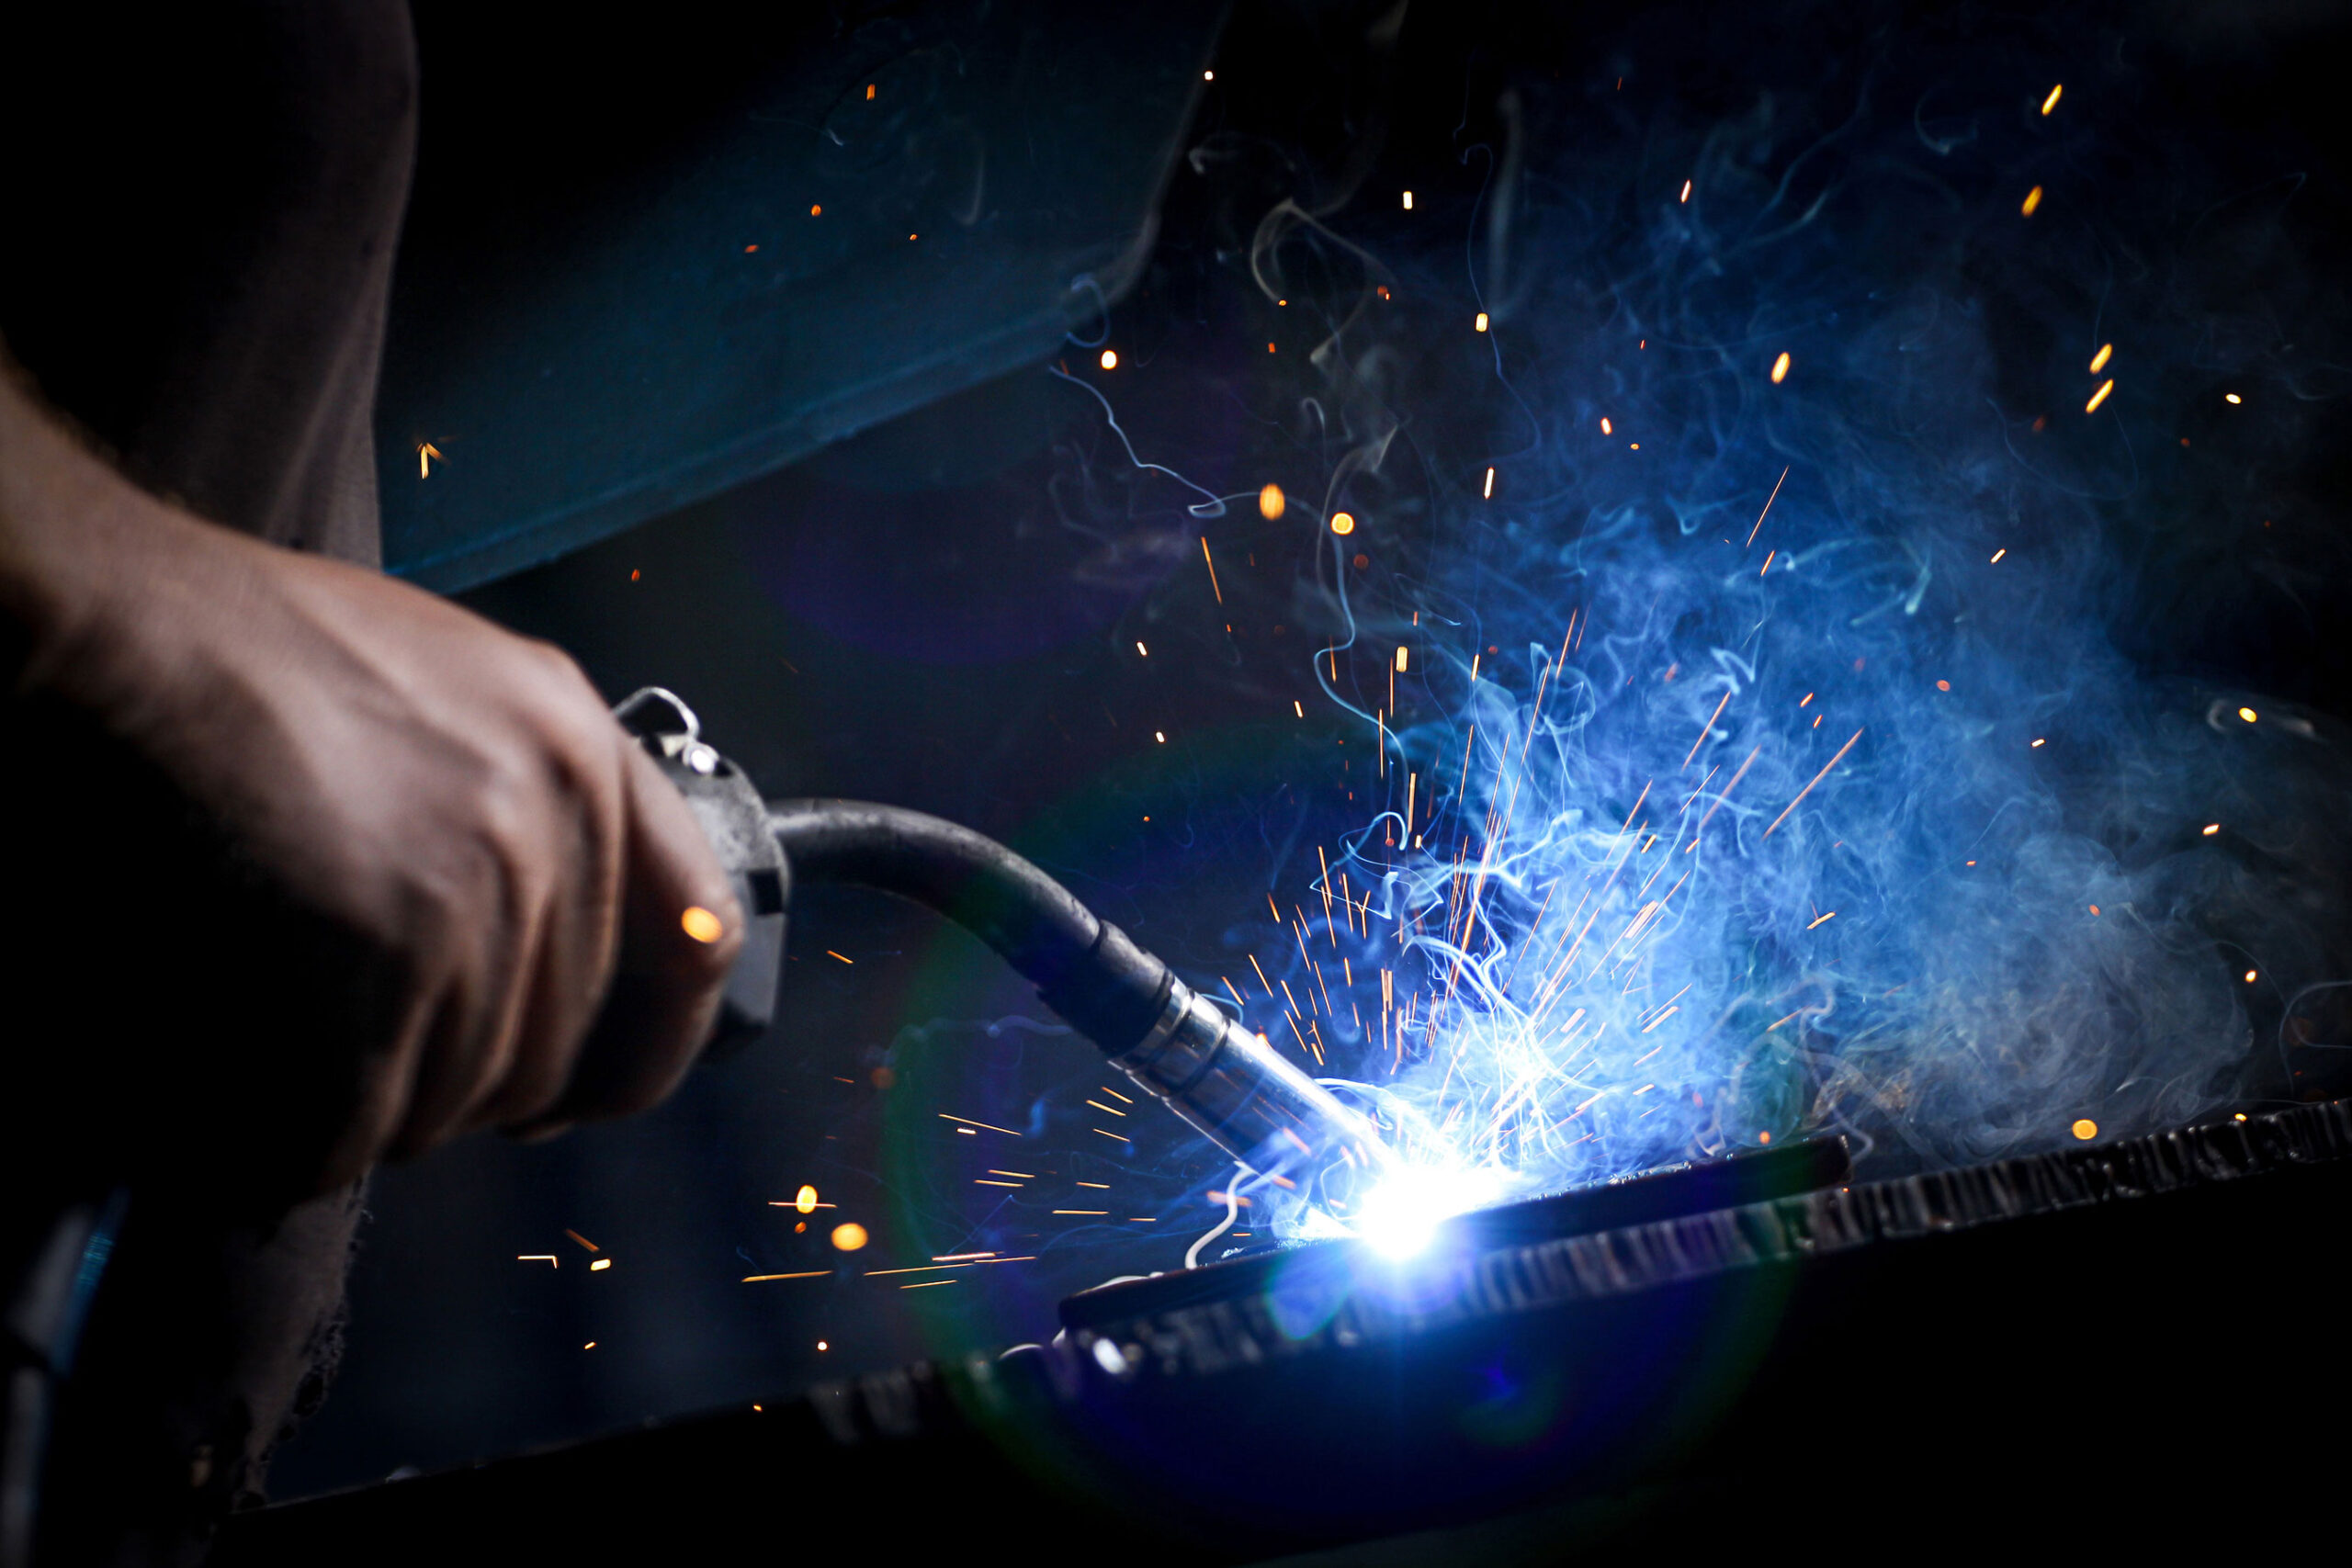 fabrication services with Mobile Auto Service